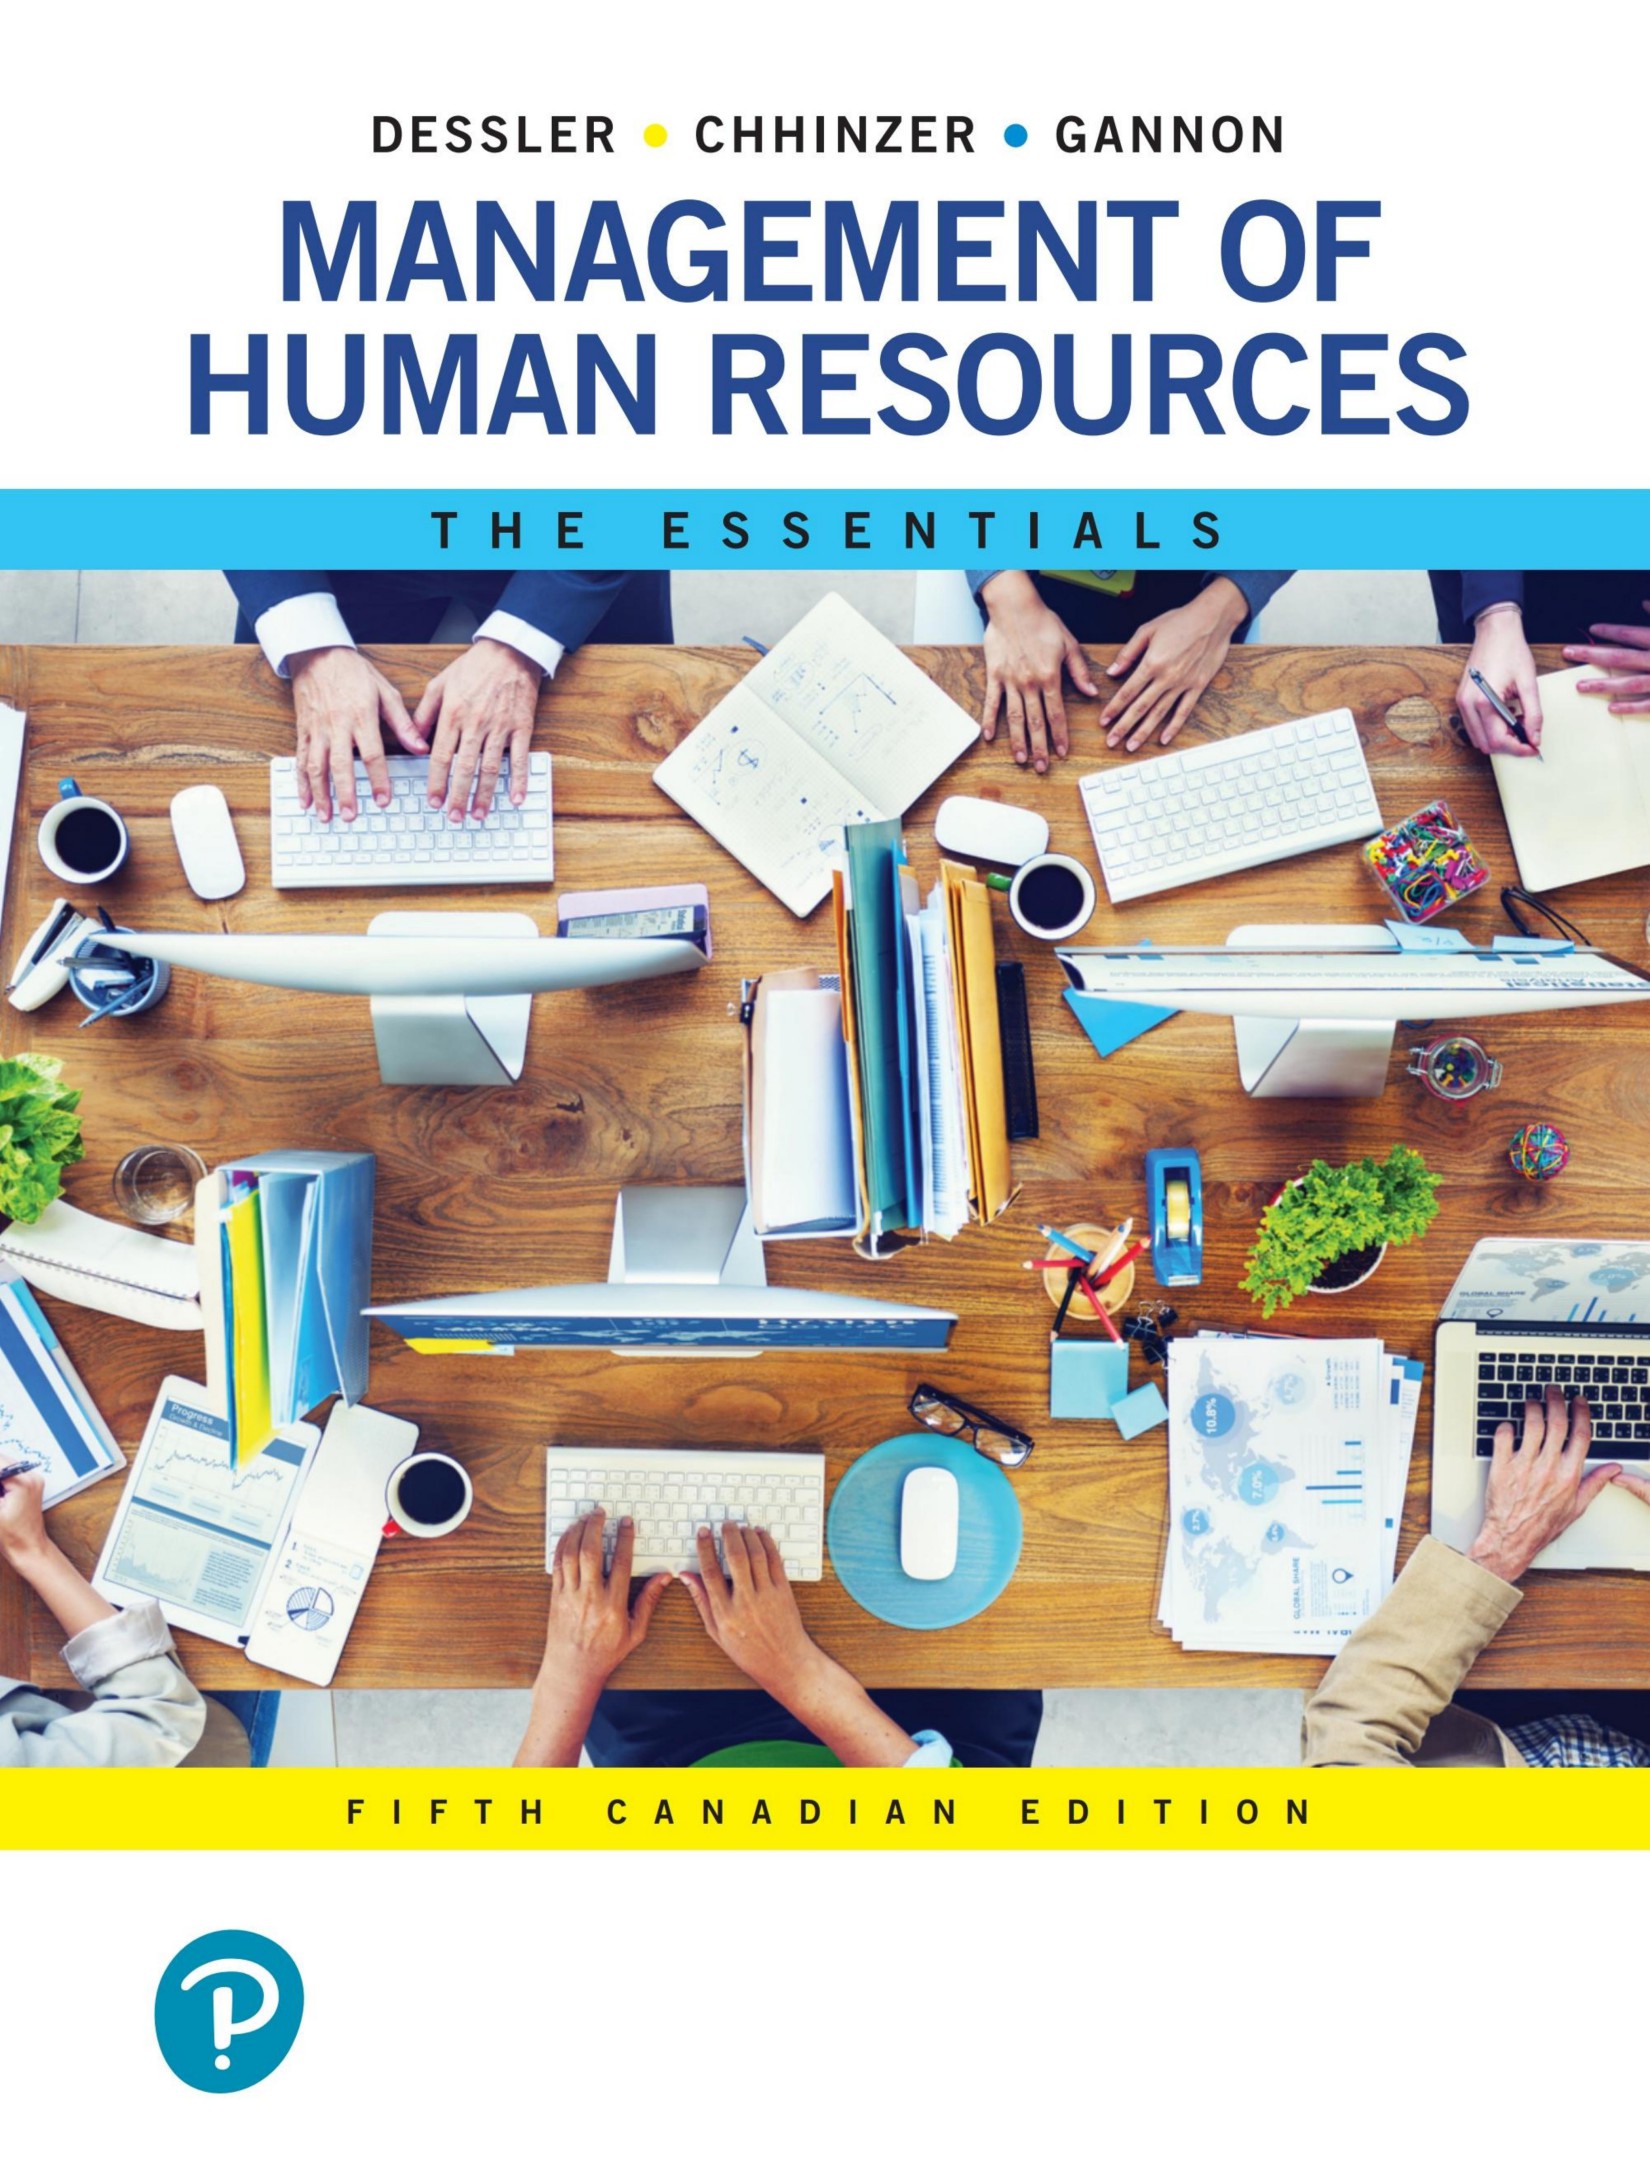 (eBook PDF)Management of Human Resources The Essentials 5th Canadian Edition by Gary Dessler,Nita Chhinzer